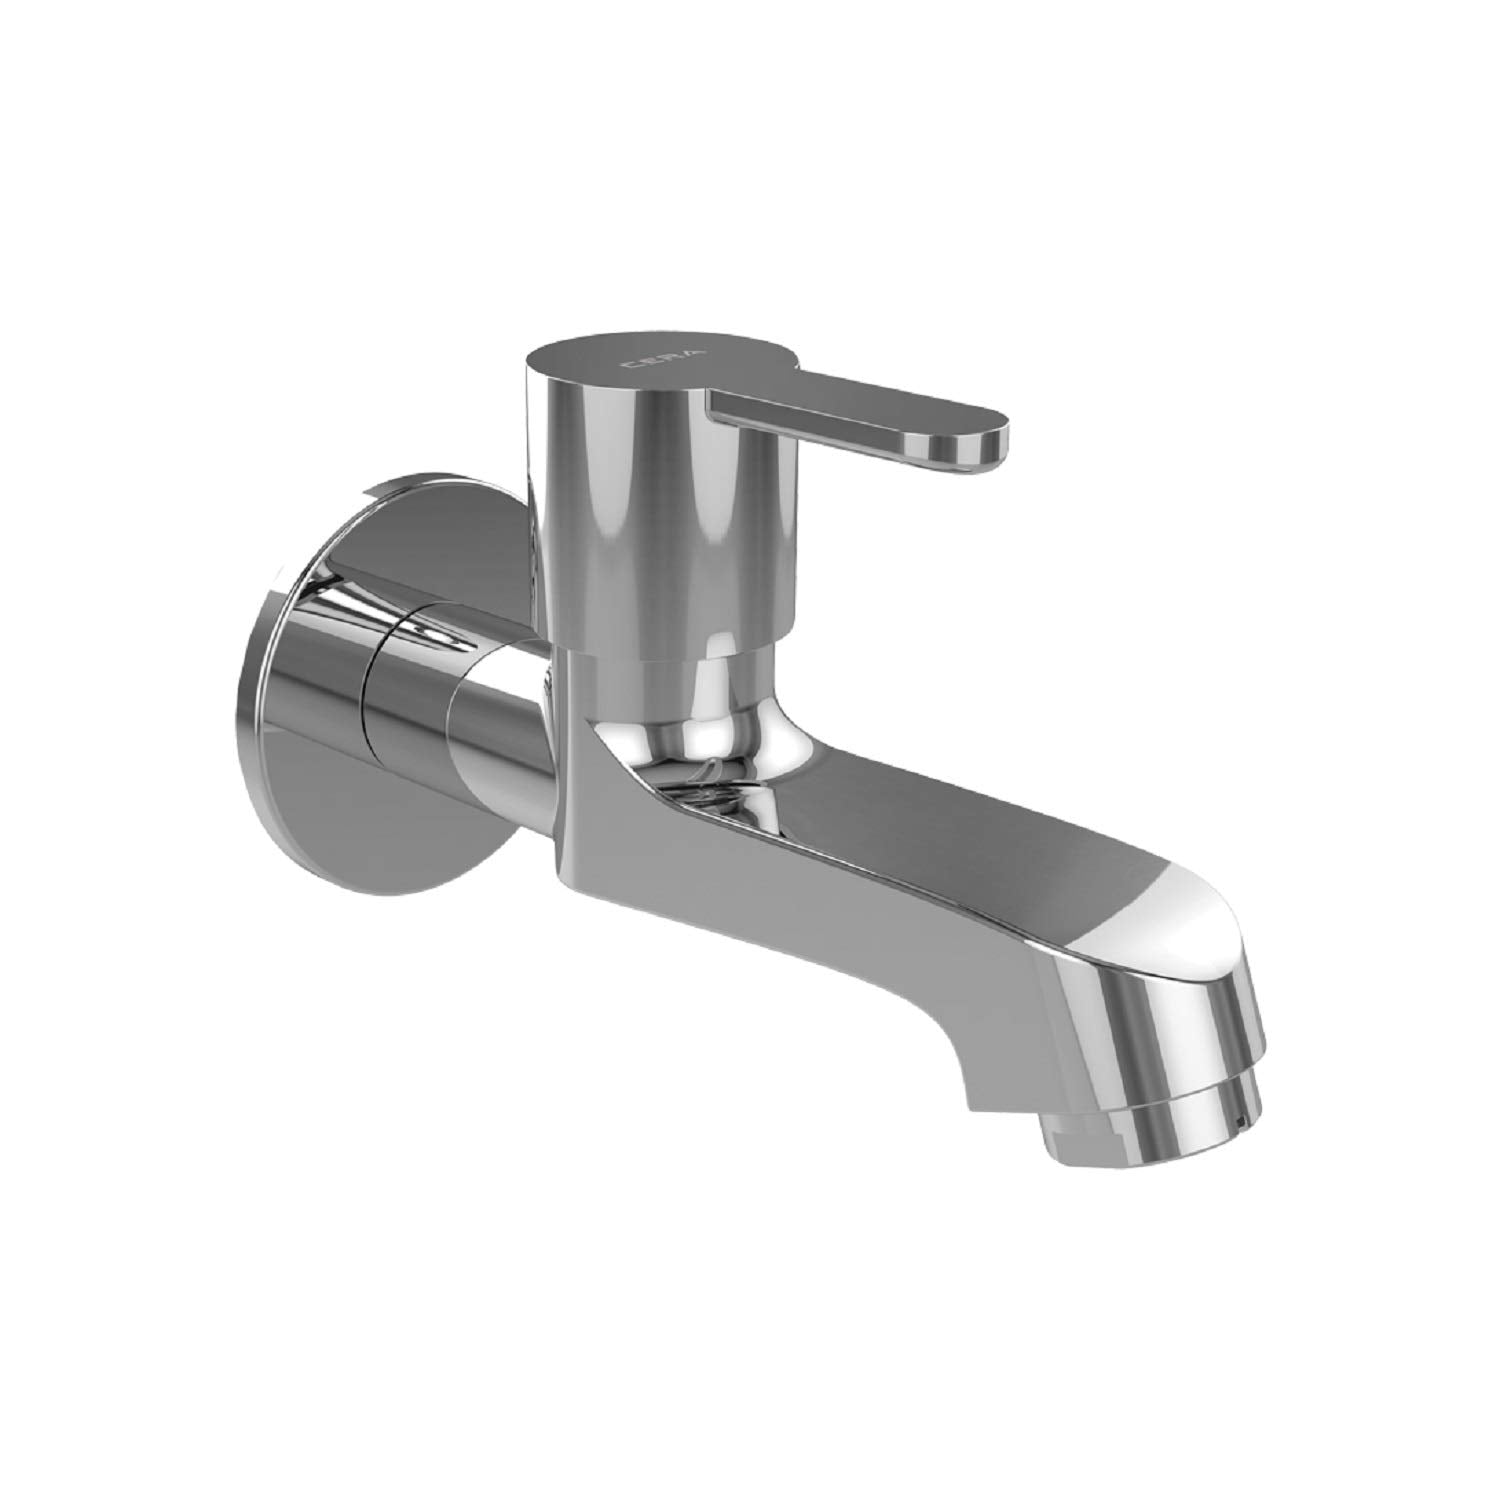 Cera Bib Cock With Wall Flange and Aerator Victor Faucets F1015151 Pack of 4